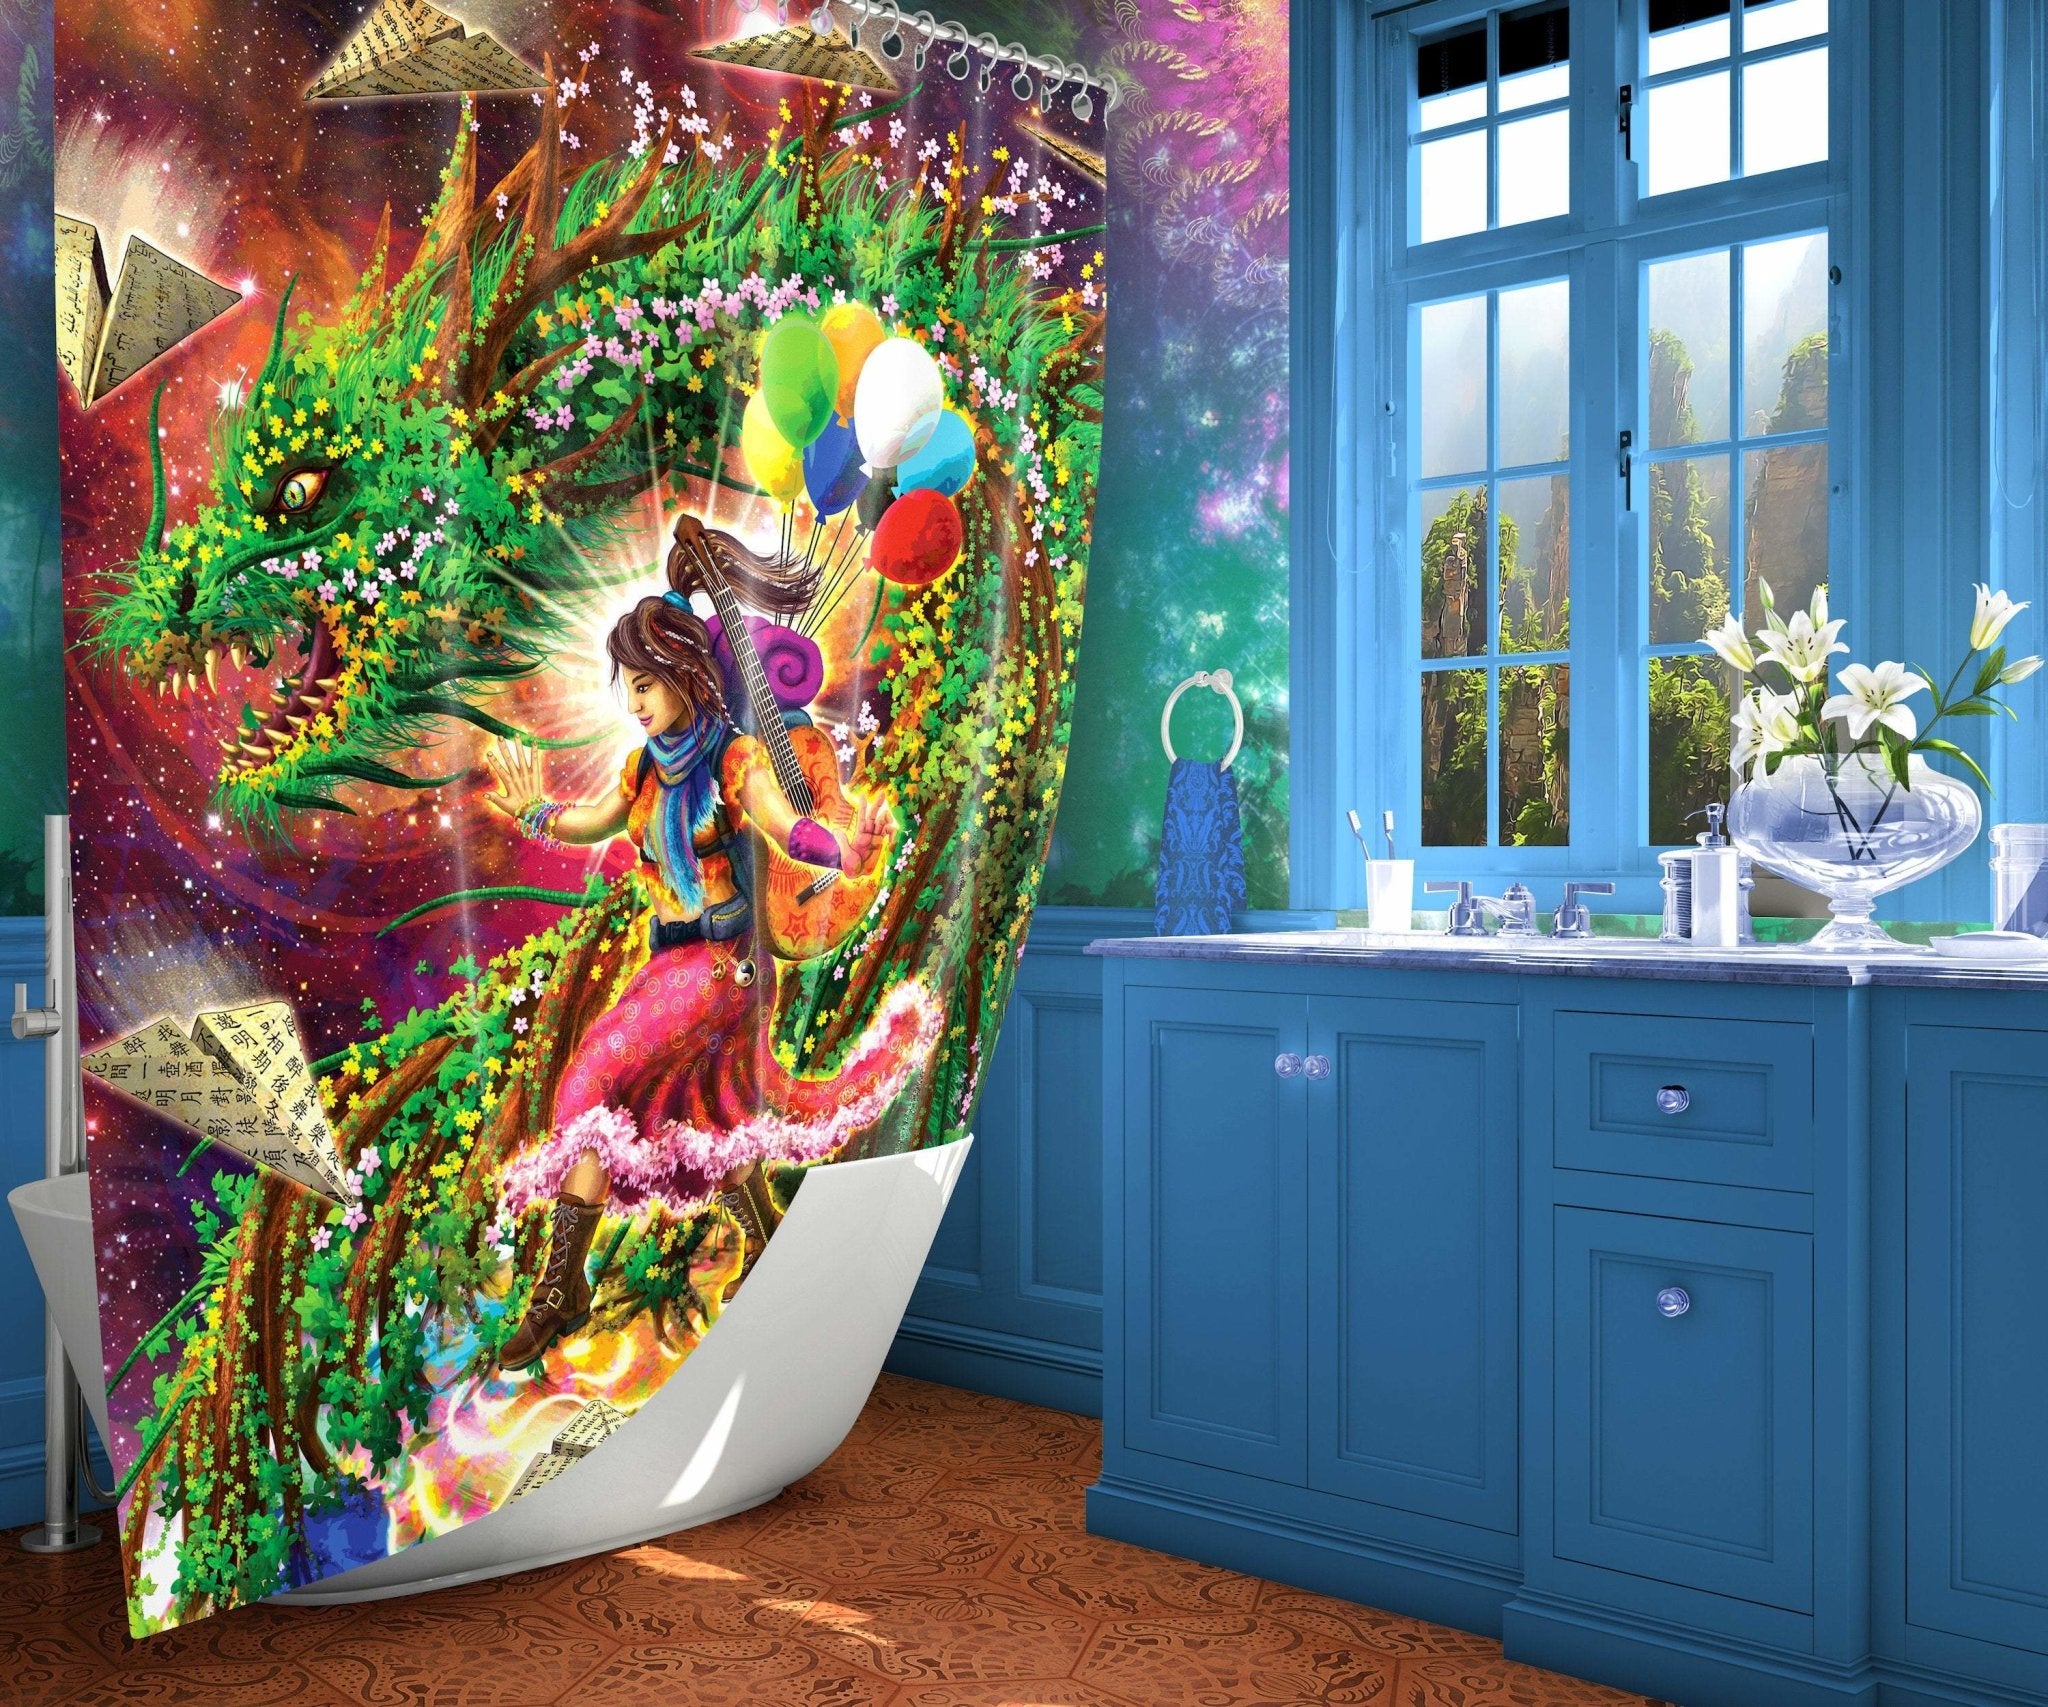 Kids Shower Curtain, Children Bathroom Decor, Fantasy Art, Eclectic and Funky Home - Travel - Abysm Internal